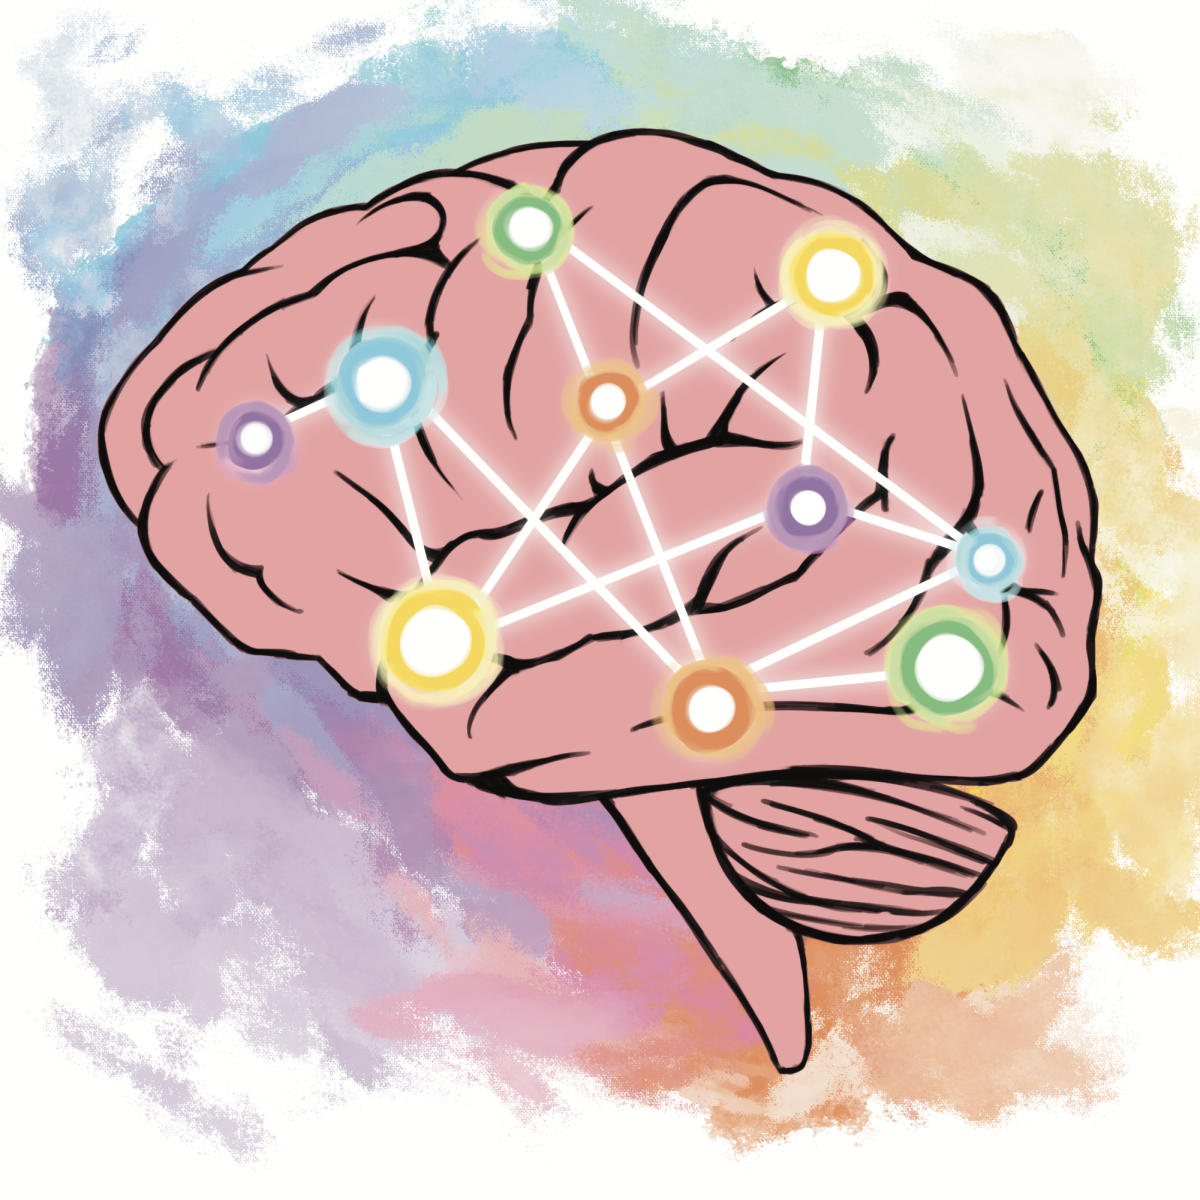 UT researchers join collaborative research project to study brain connections